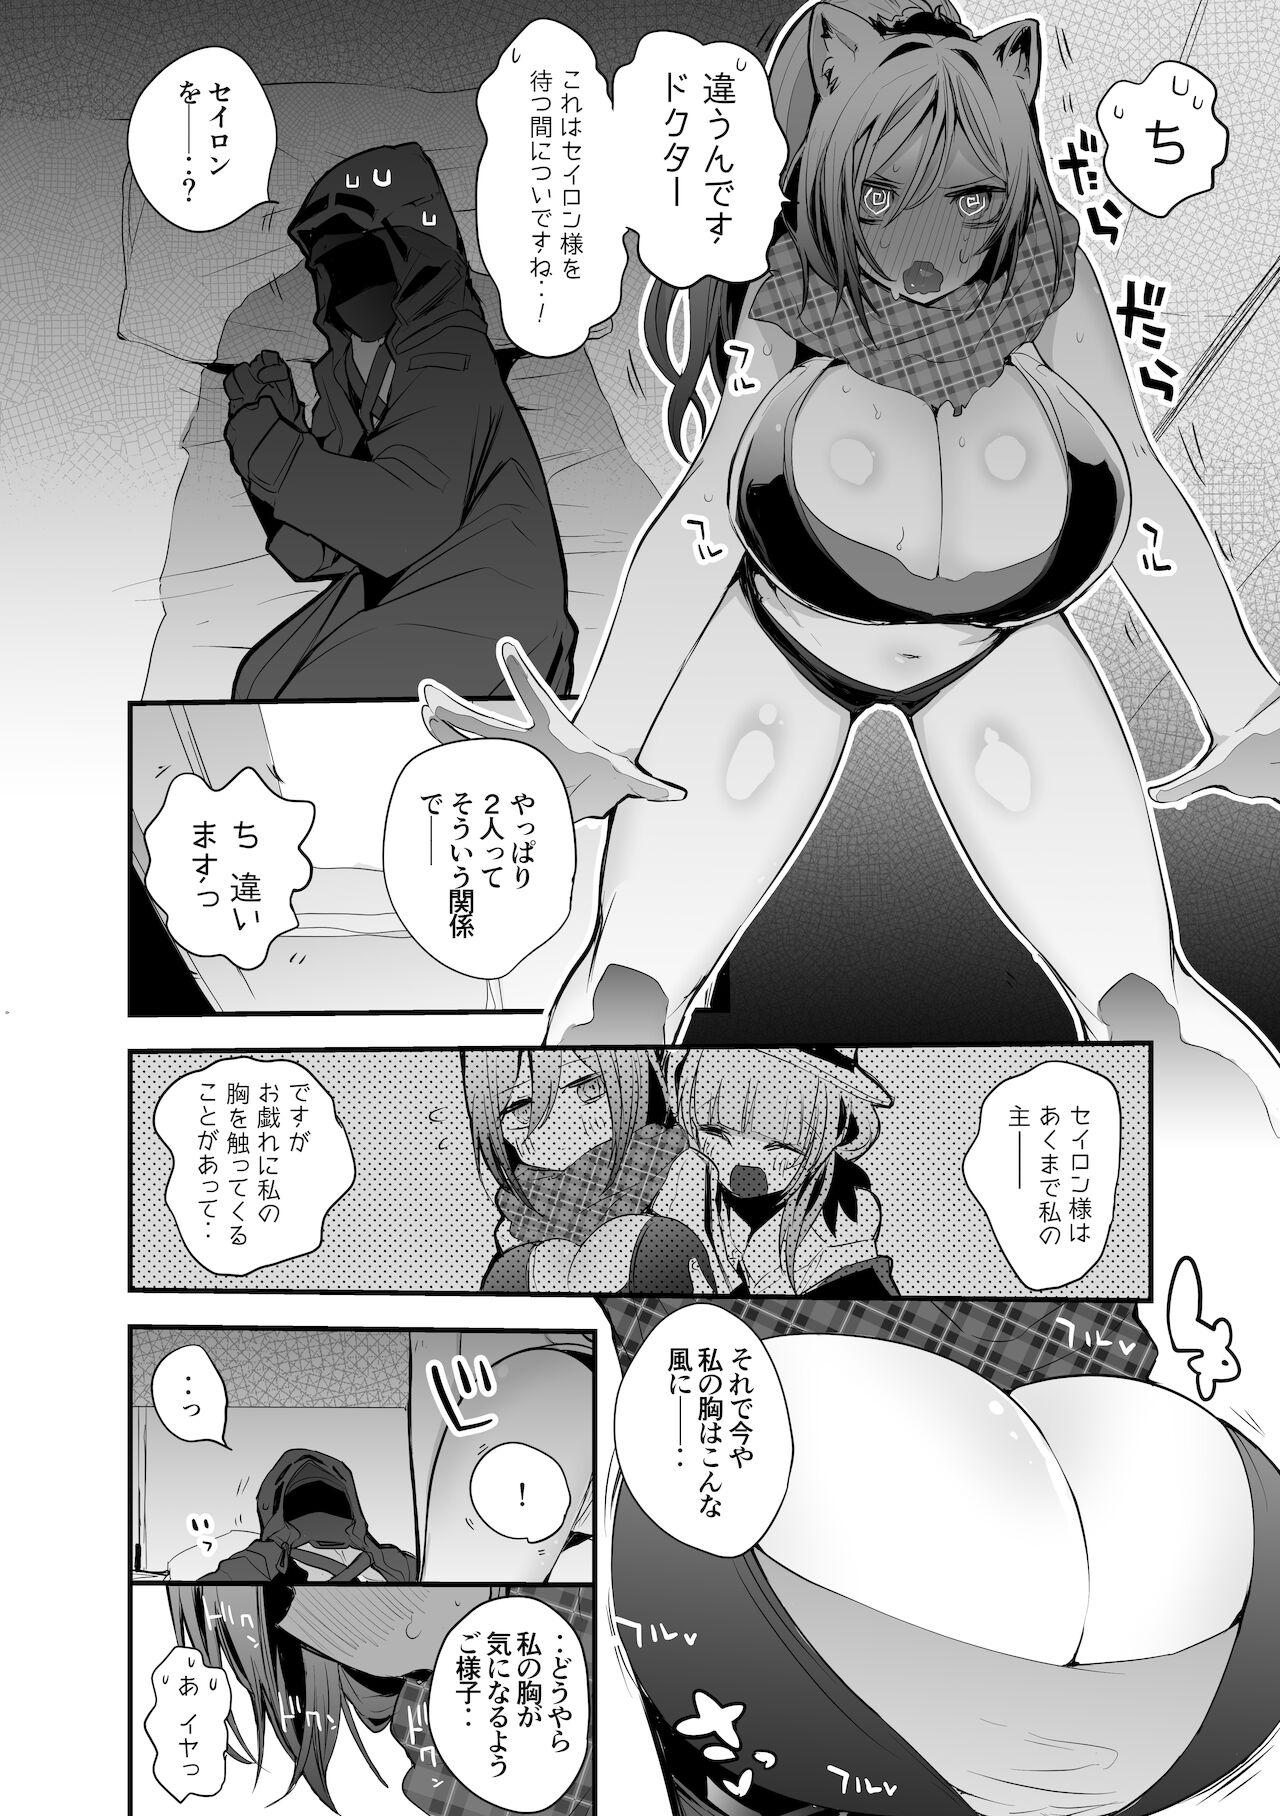 Asiansex シュヴァルツは押し倒す編 - Arknights Gay Studs - Page 3